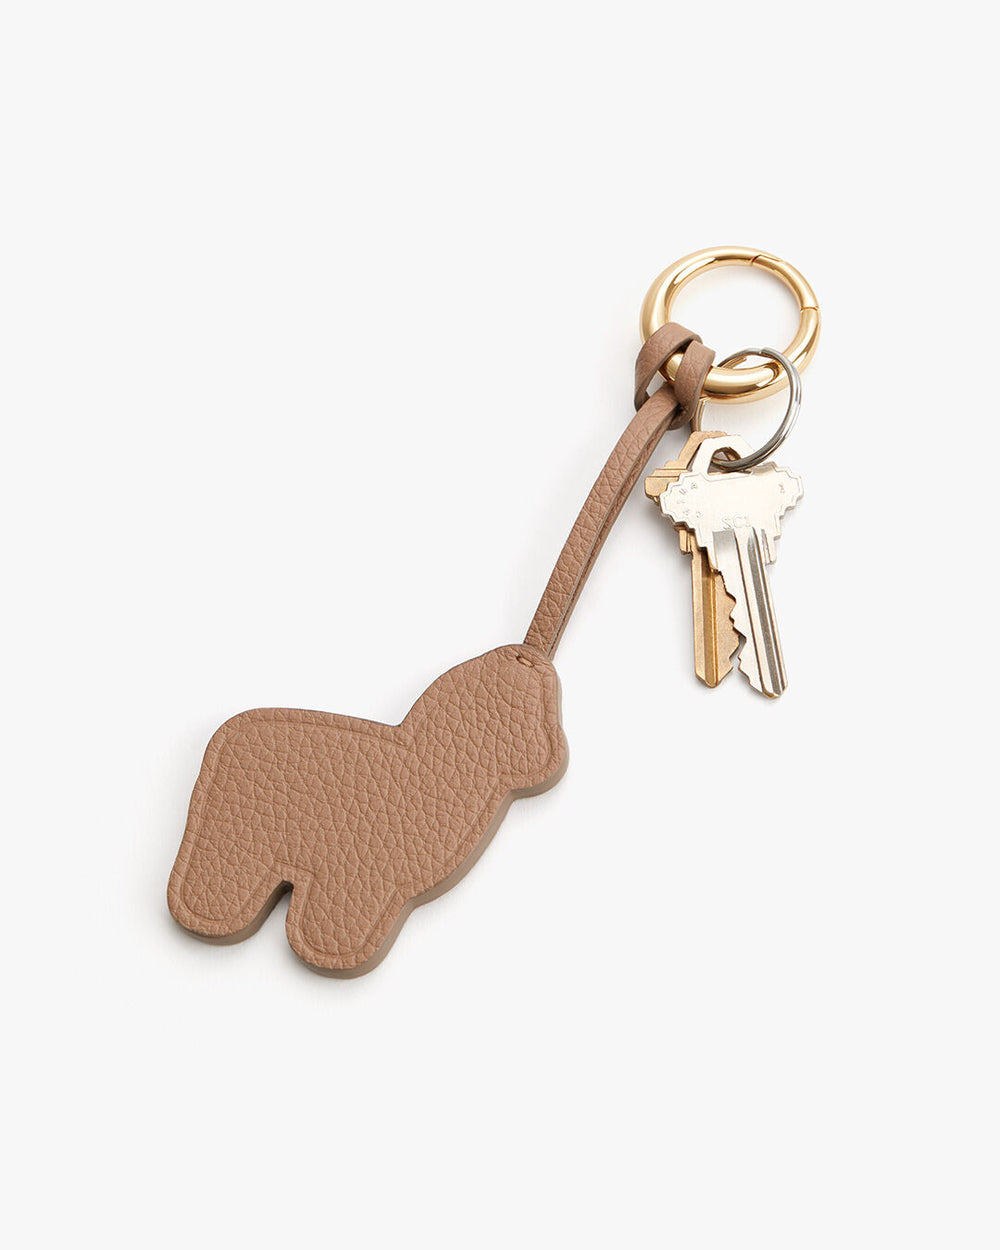 Keychain with animal shape and keys attached on a plain background.